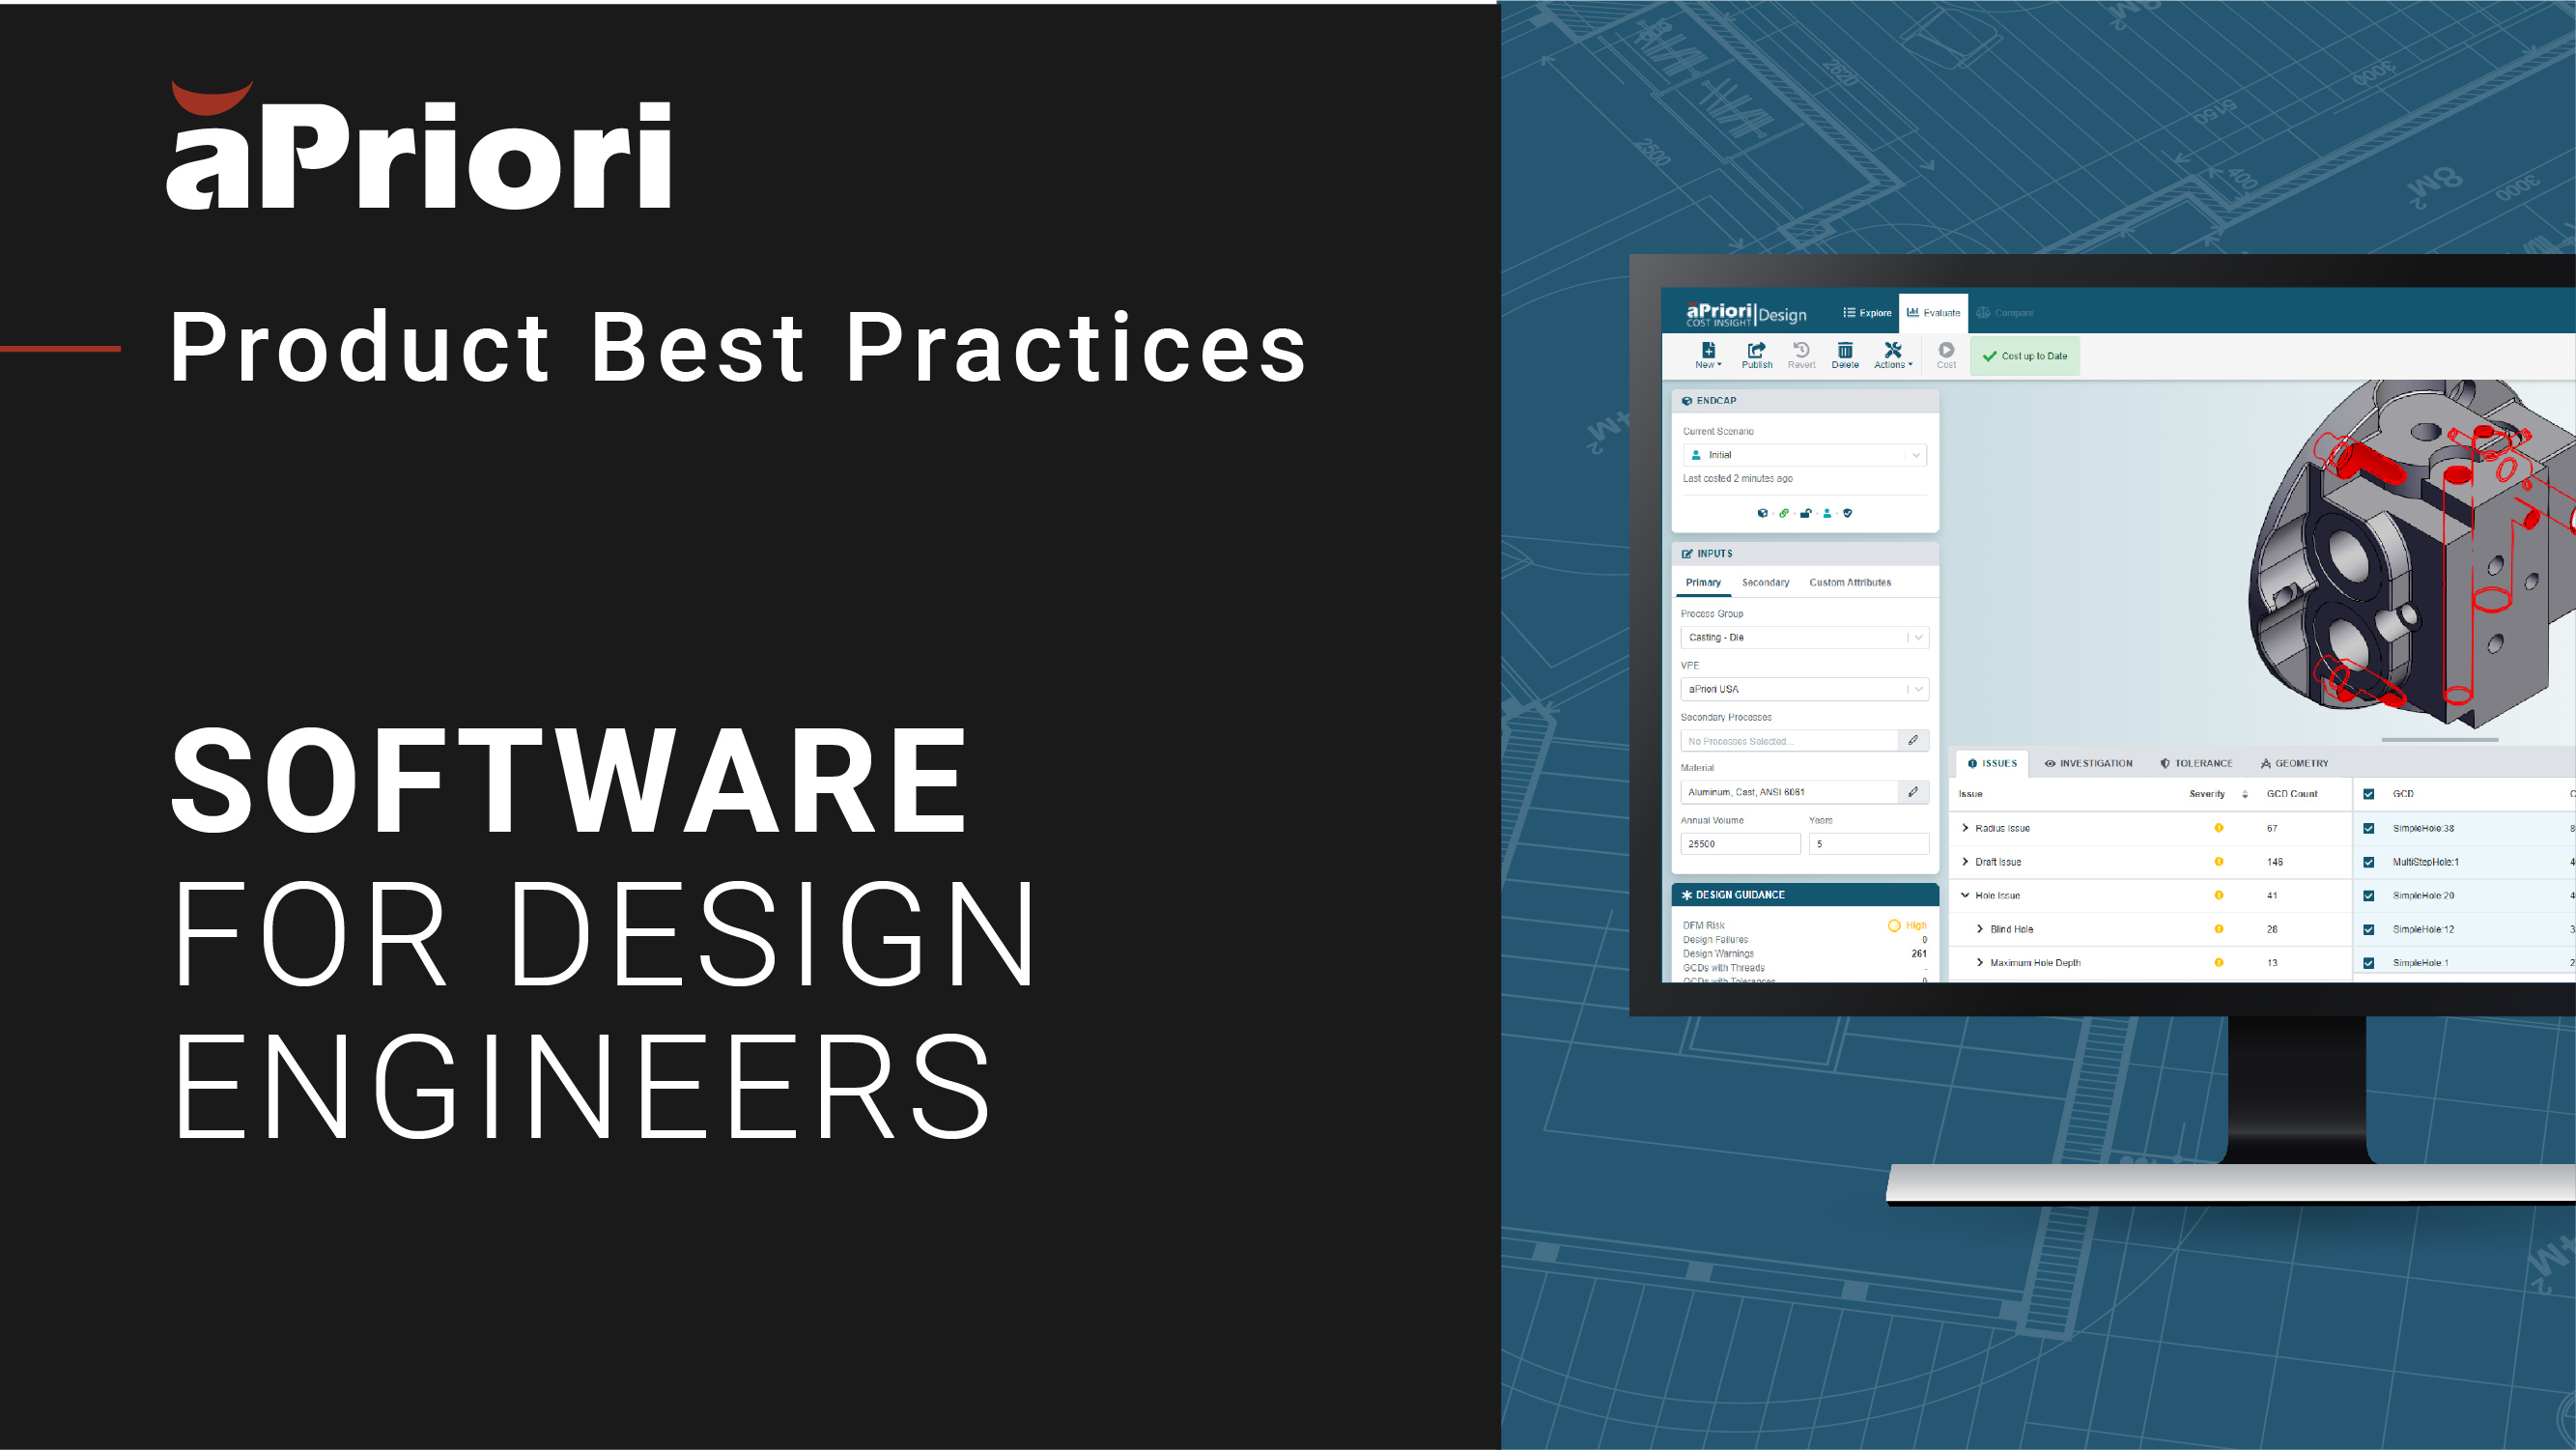 aPriori Cost Insight Design - A Foundational Tool For Successful Design Engineering